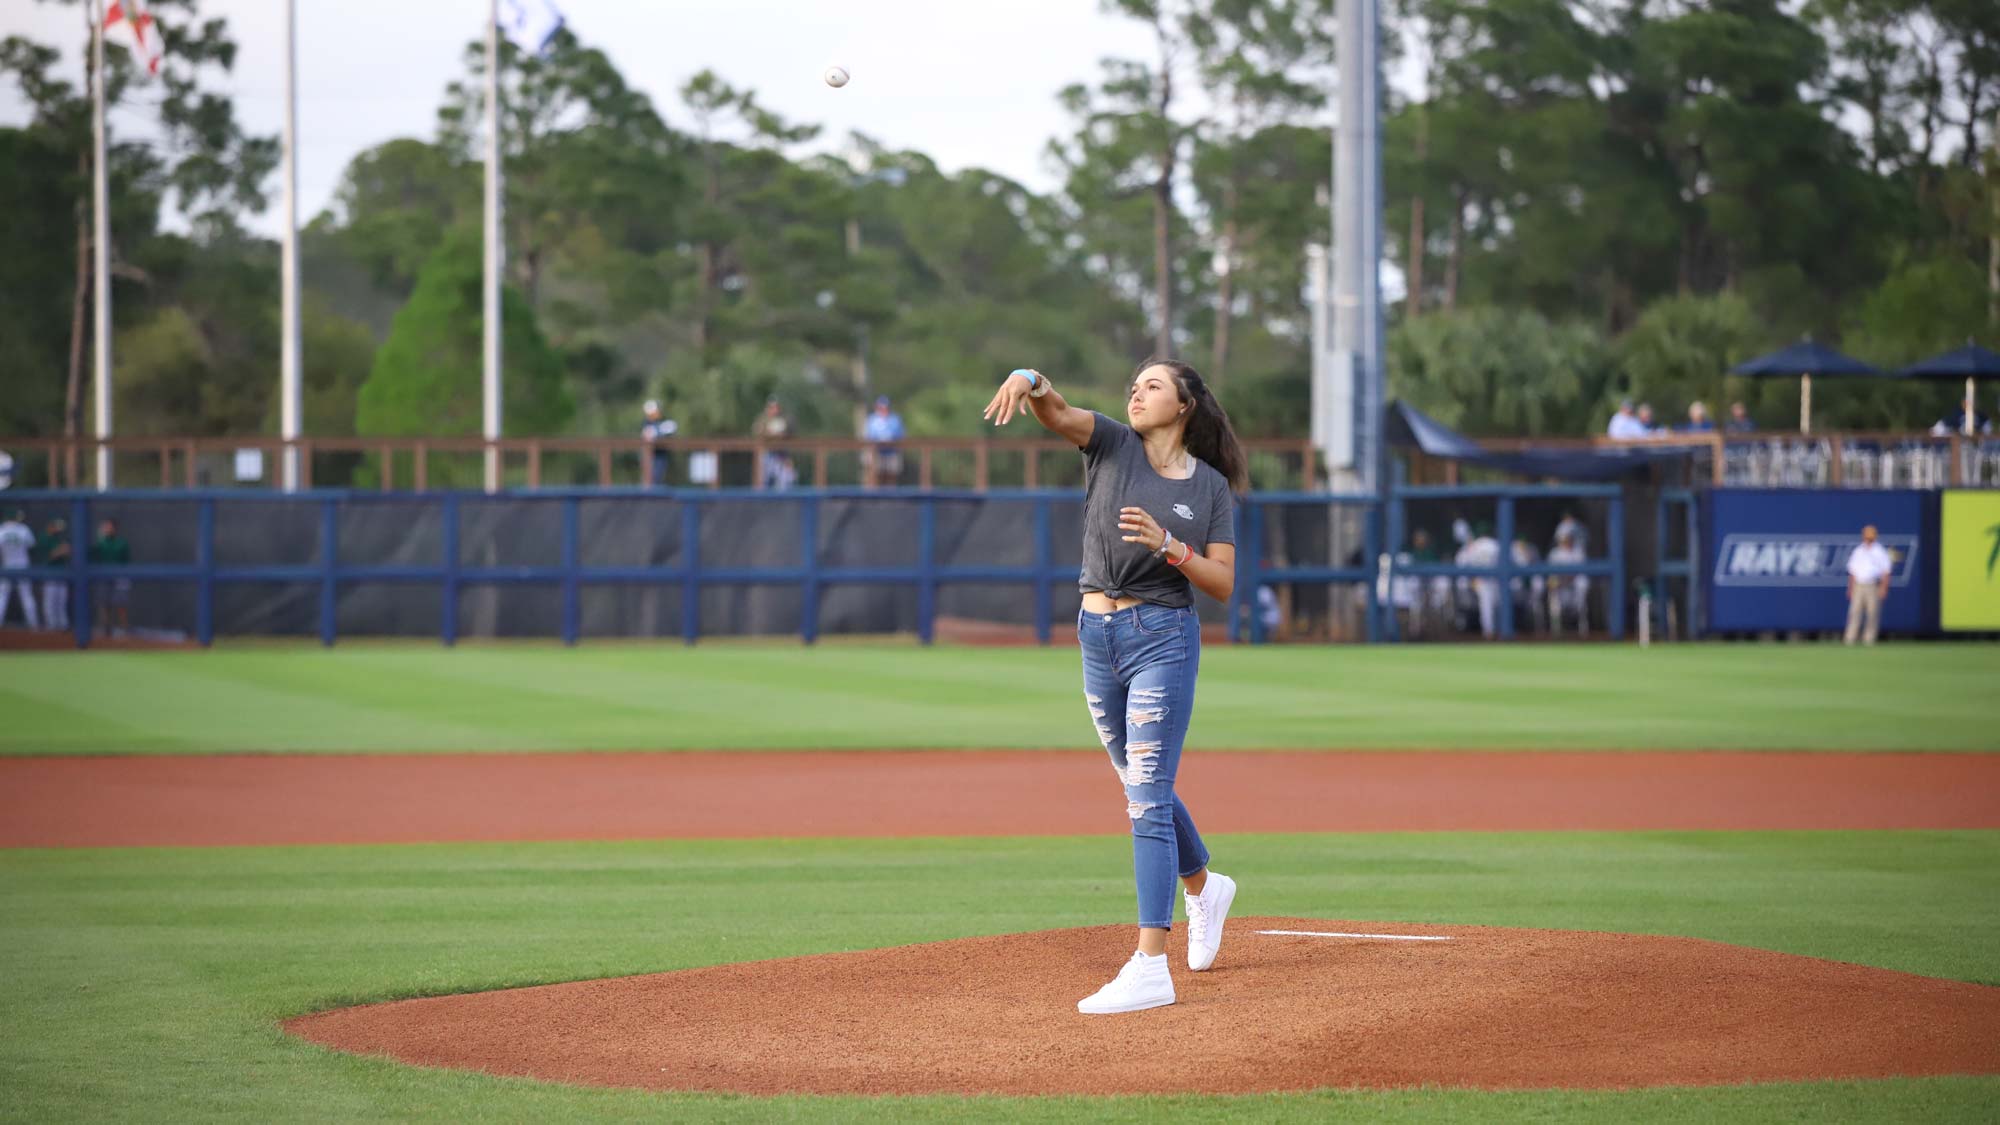 Alexa Pano throws first pitch